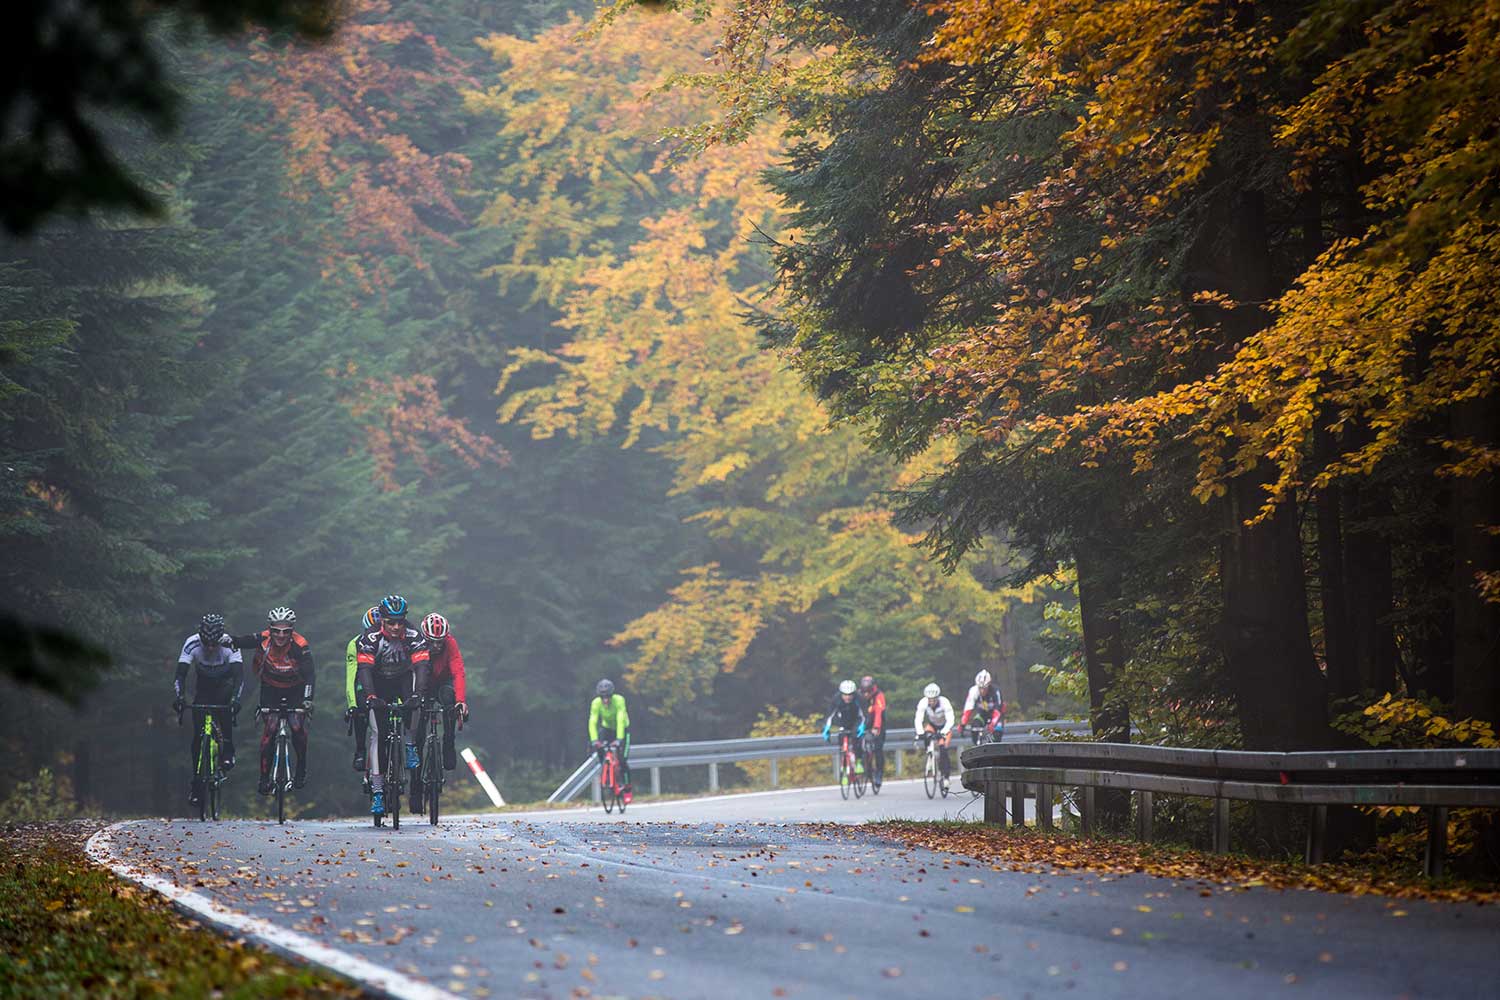 Group of cyclists riding during the fall